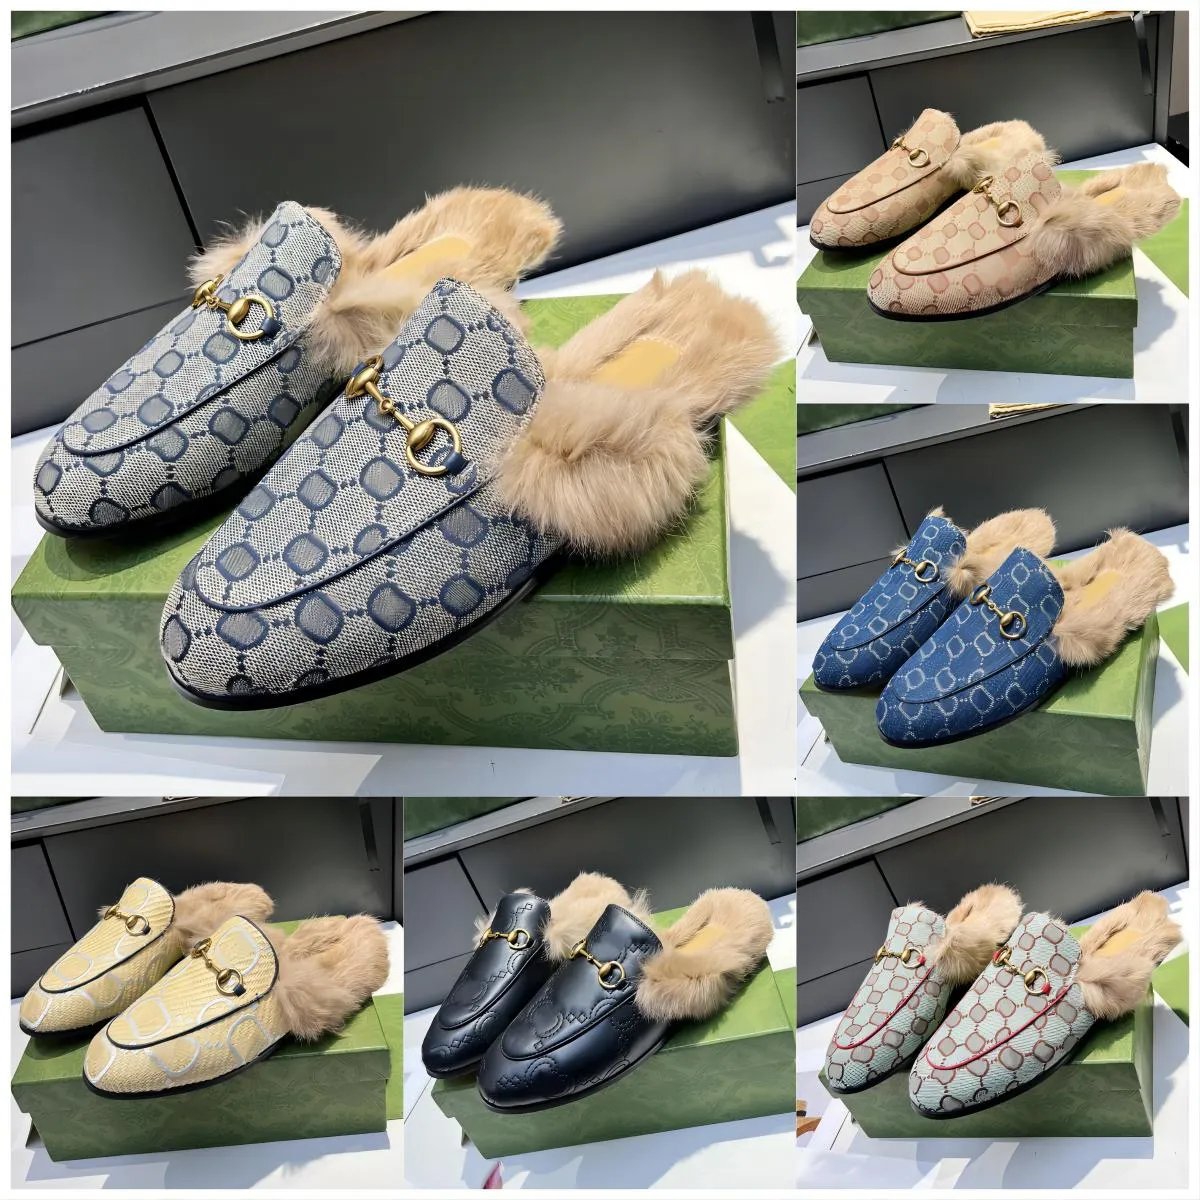 Suede Slipper Jordaan Loafer Sandal Designer Women Leather Mule Gold Embroidery Sandals Luxury Comfort Fashion Wedding Party Dress Office Shoes